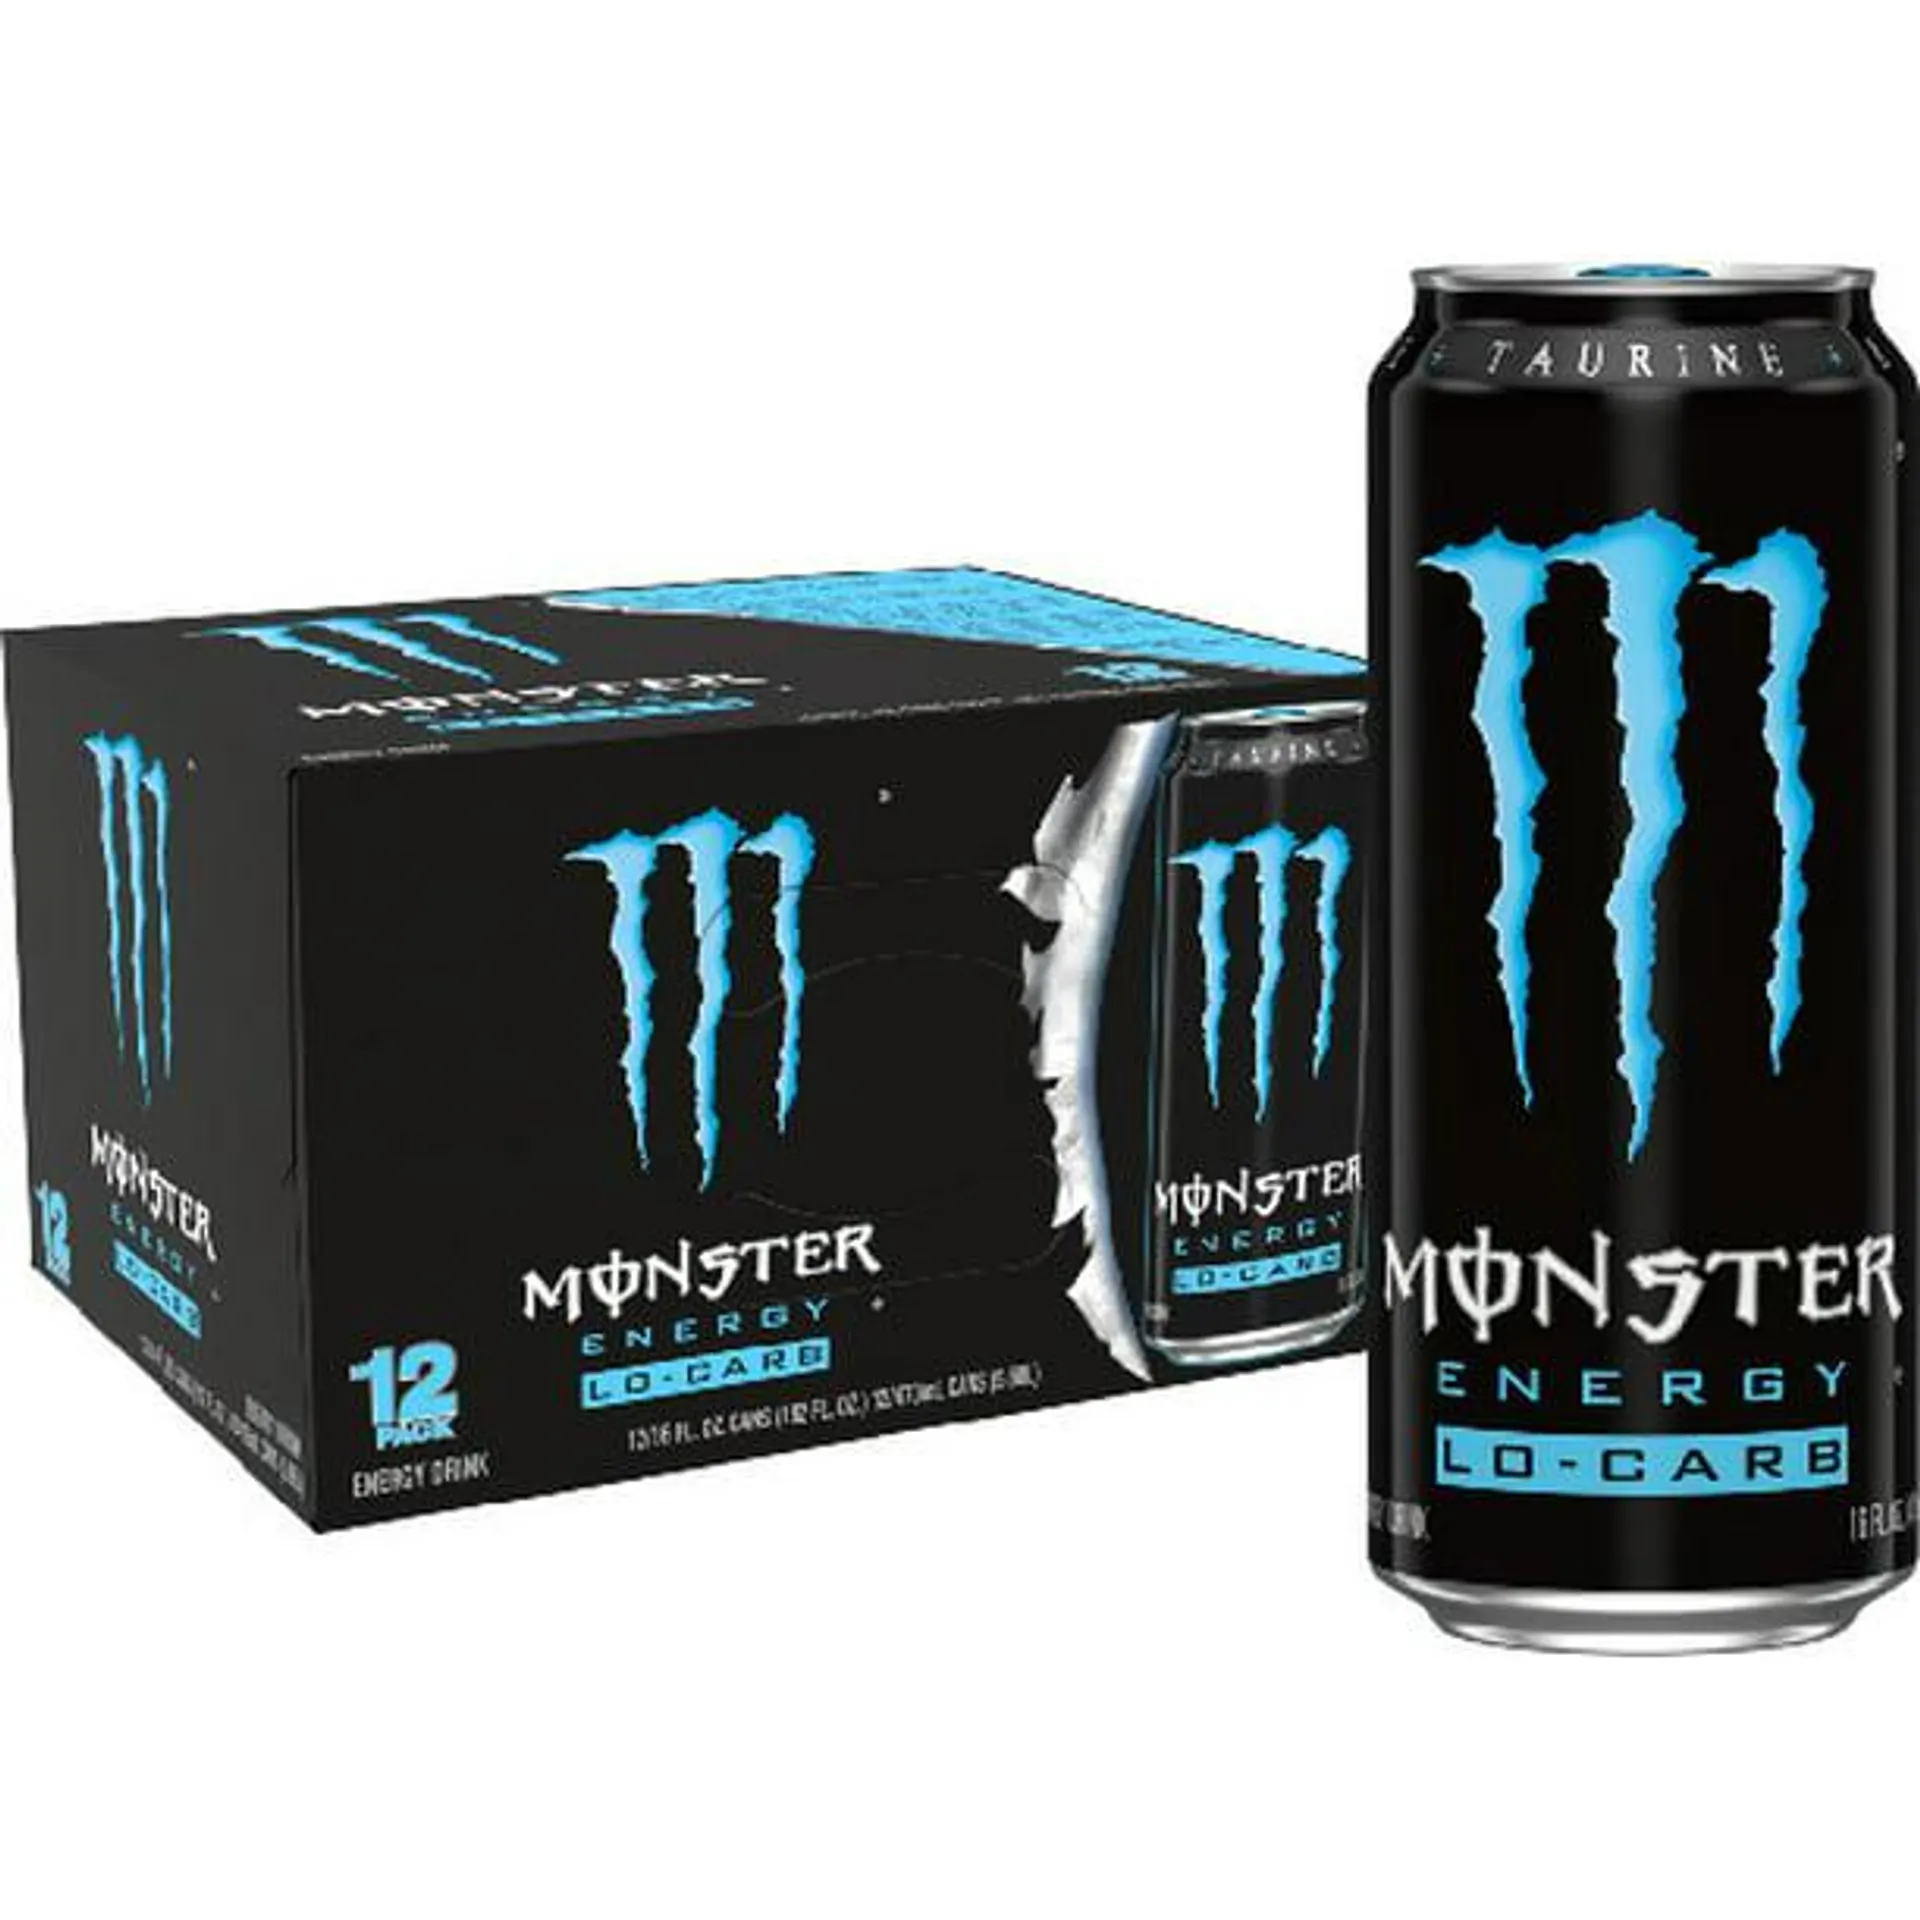 (12 Cans) Monster Energy Lo-Carb, Energy Drink, 16 fl oz